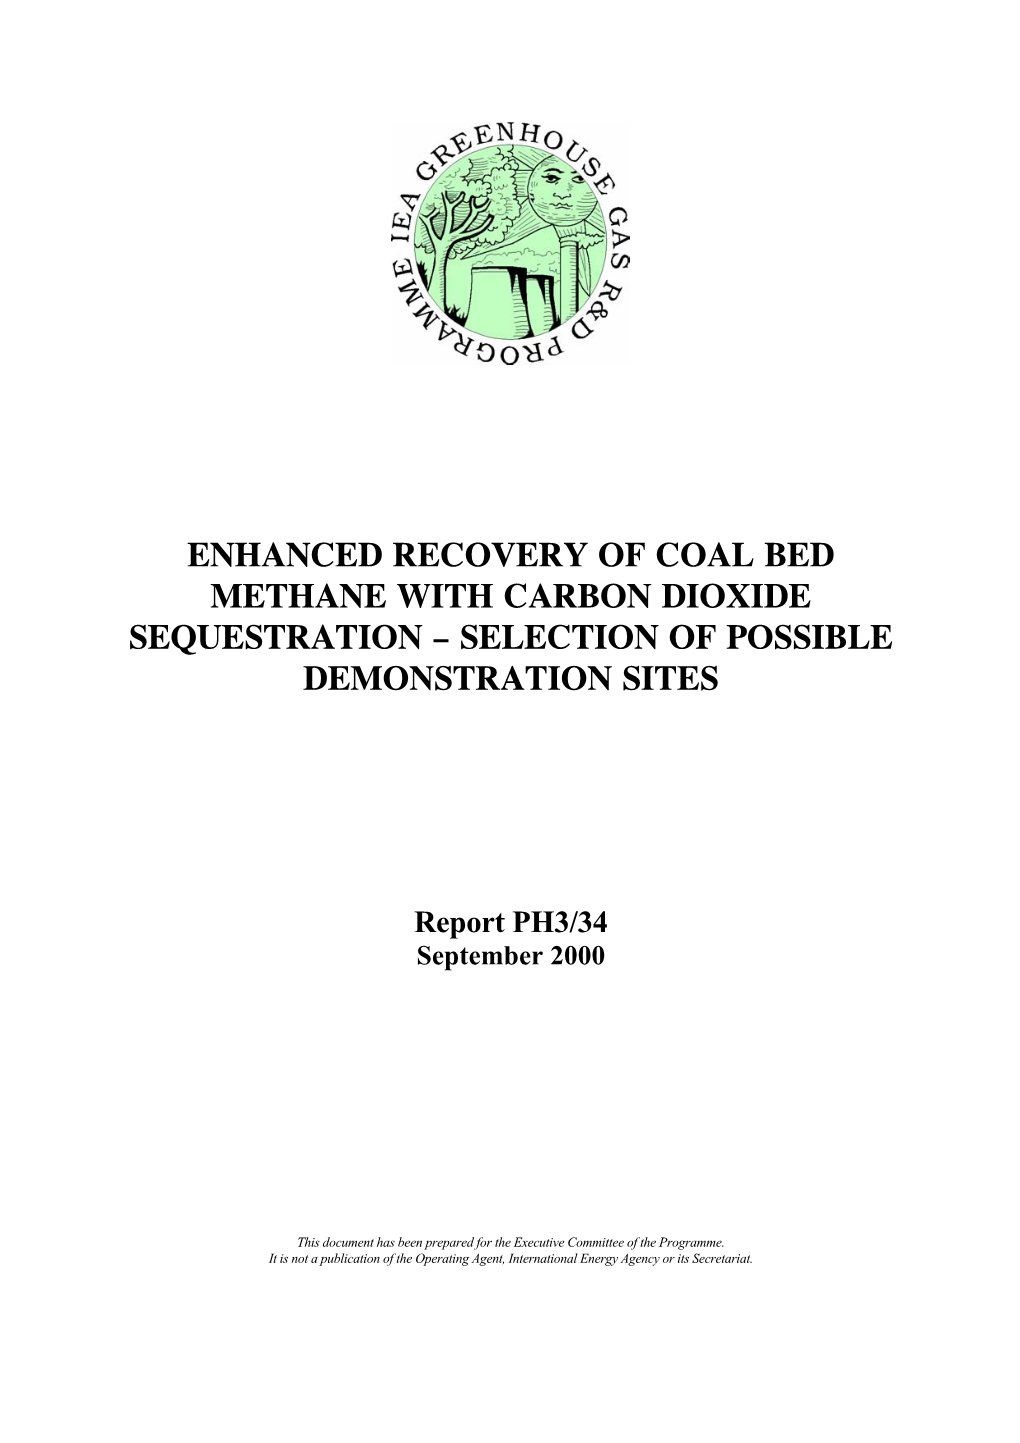 Enhanced Recovery of Coal Bed Methane with Carbon Dioxide Sequestration – Selection of Possible Demonstration Sites